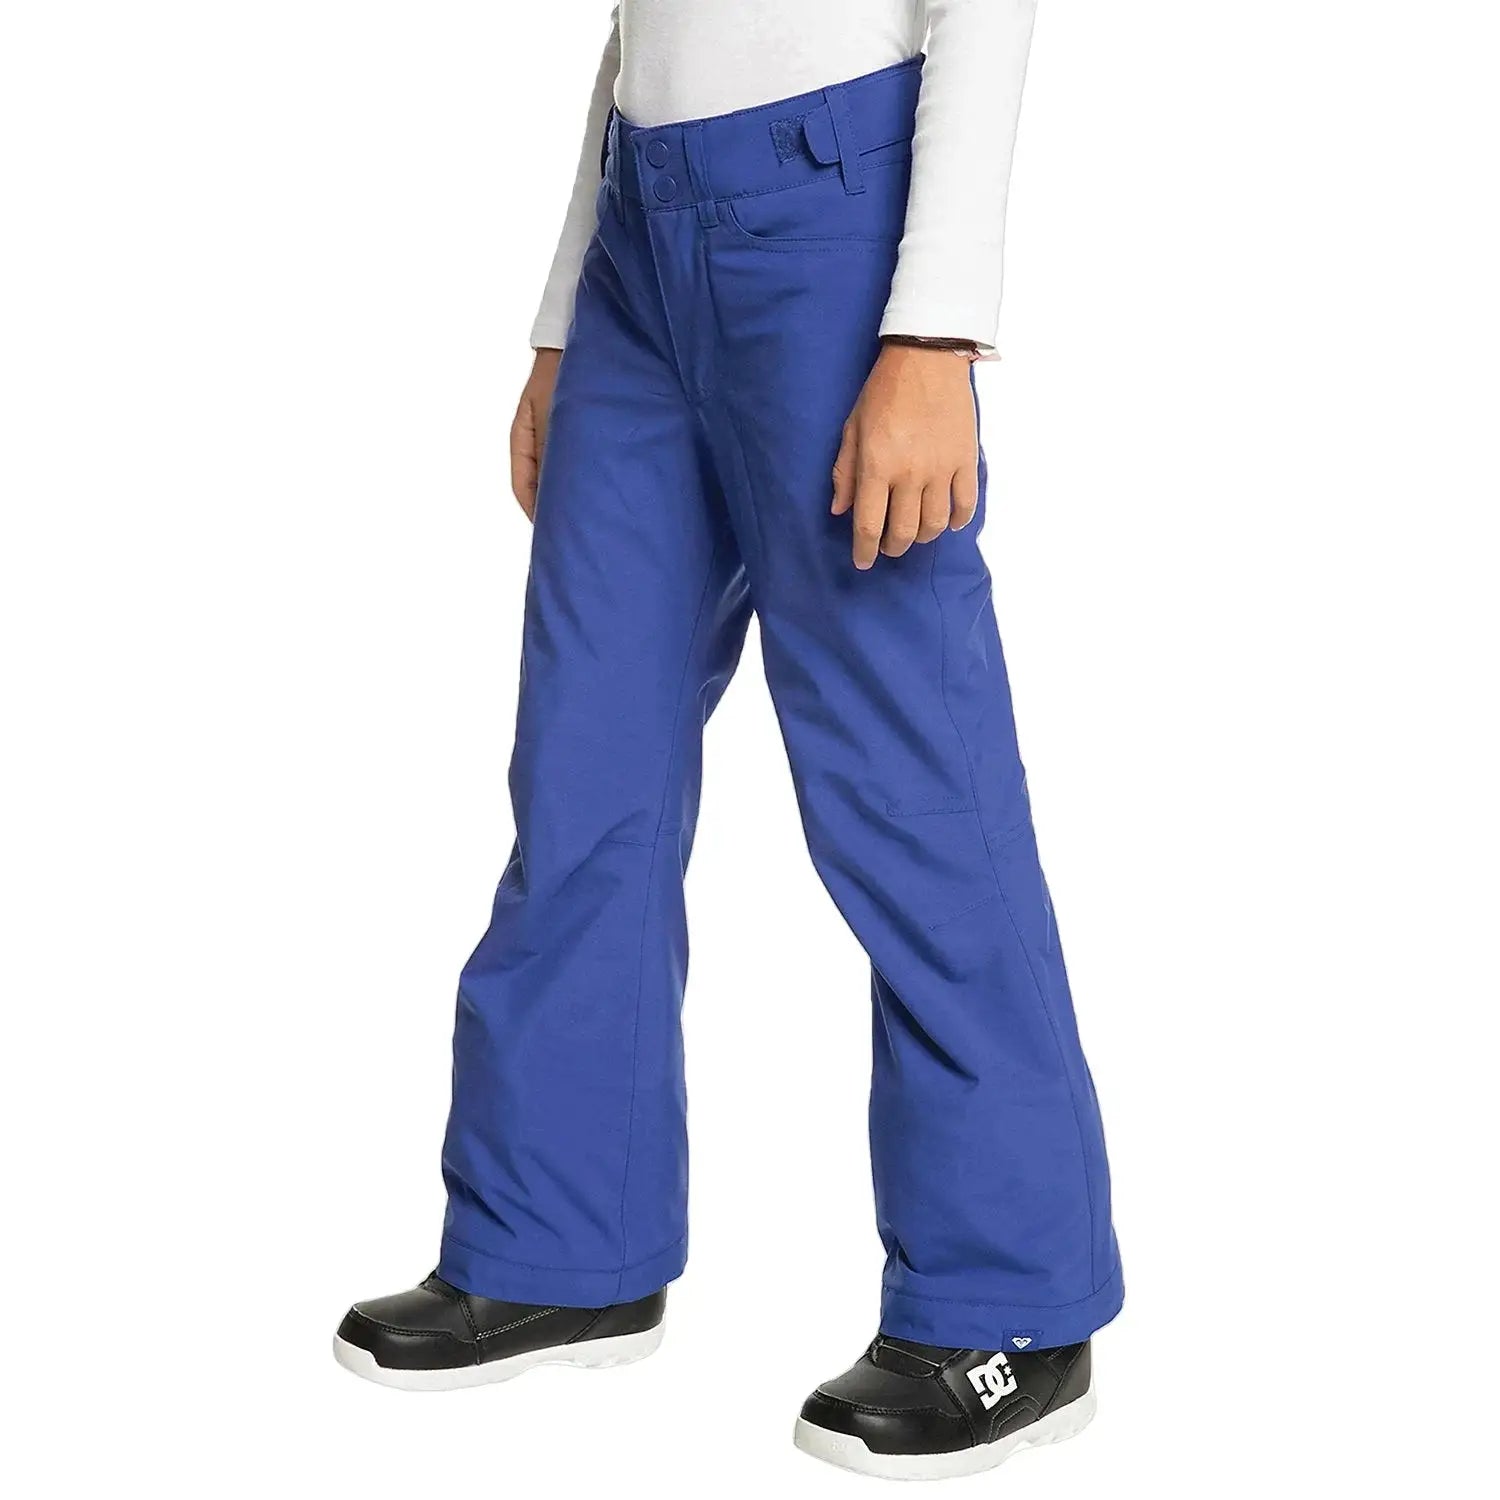 Roxy Girl's Backyard Snowpants shown in the Bluing color option. Side view.